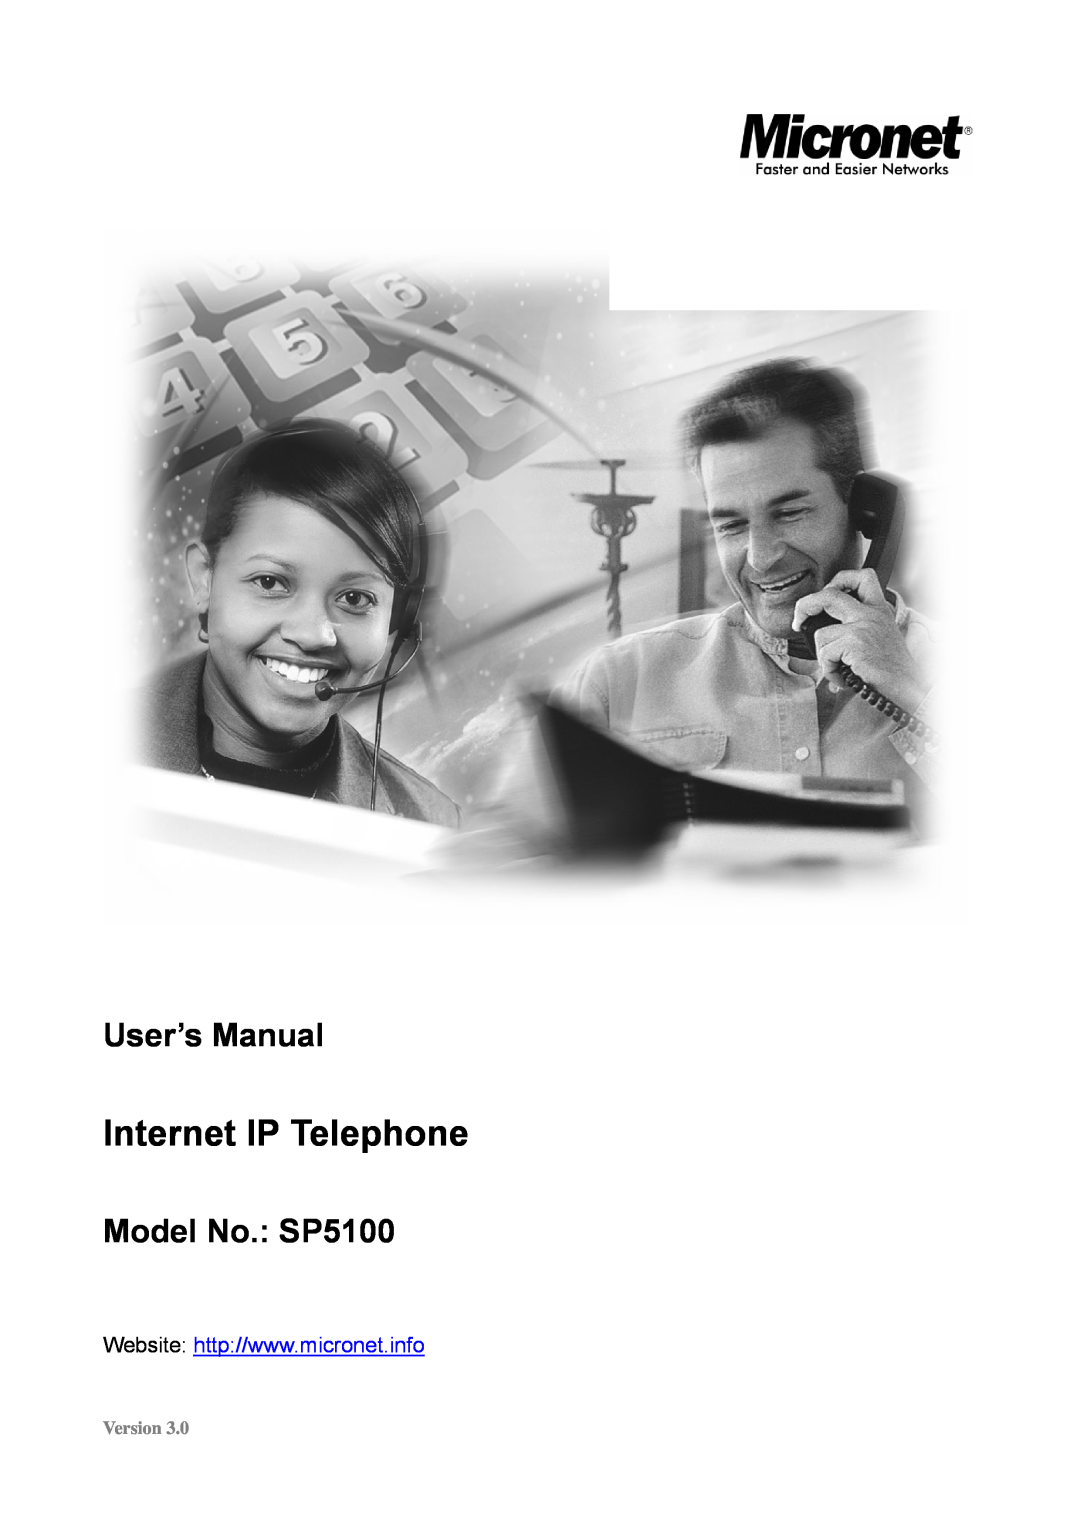 MicroNet Technology user manual Internet IP Telephone, User’s Manual, Model No. SP5100, Version 